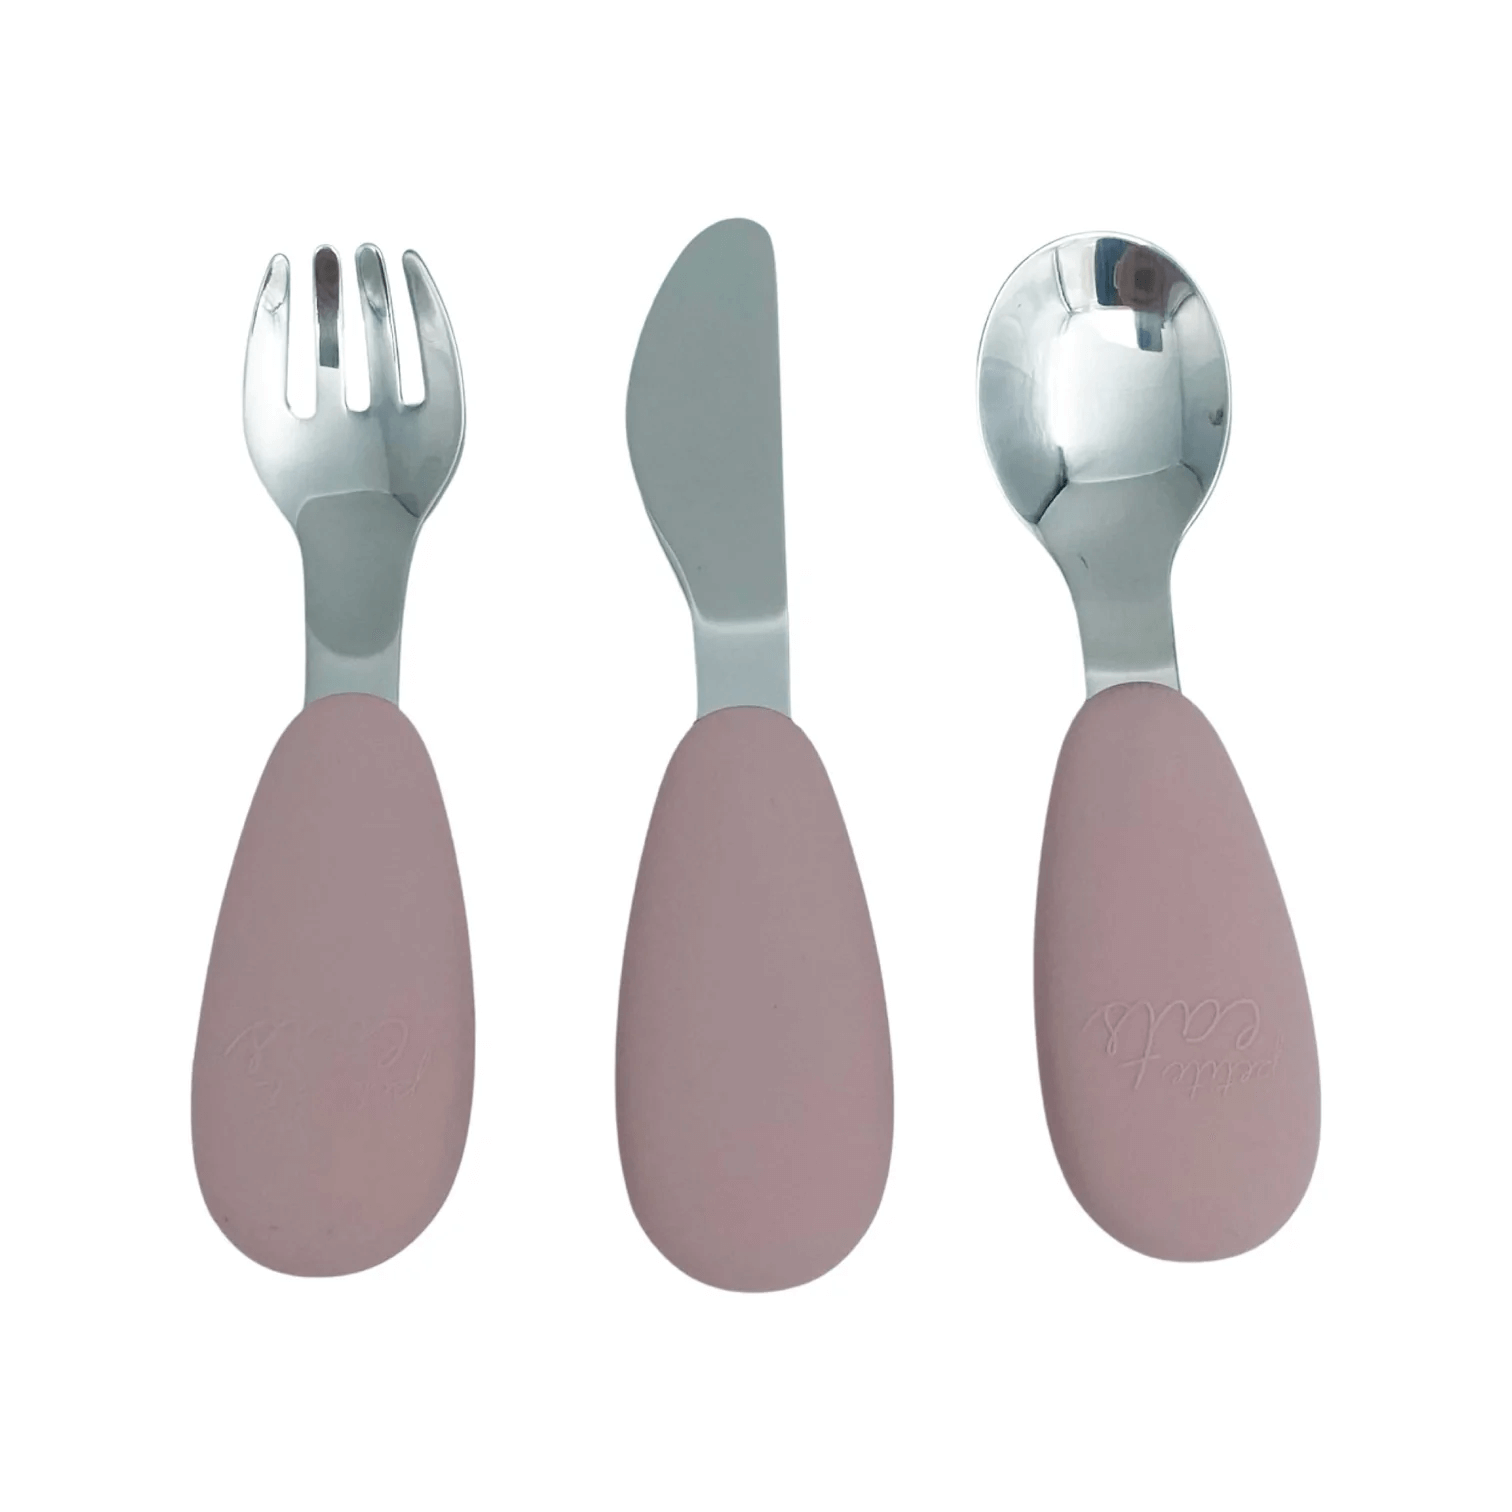 Petite Eats Full Metal Cutlery Set in Dusty Lilac' available at Bear & Moo